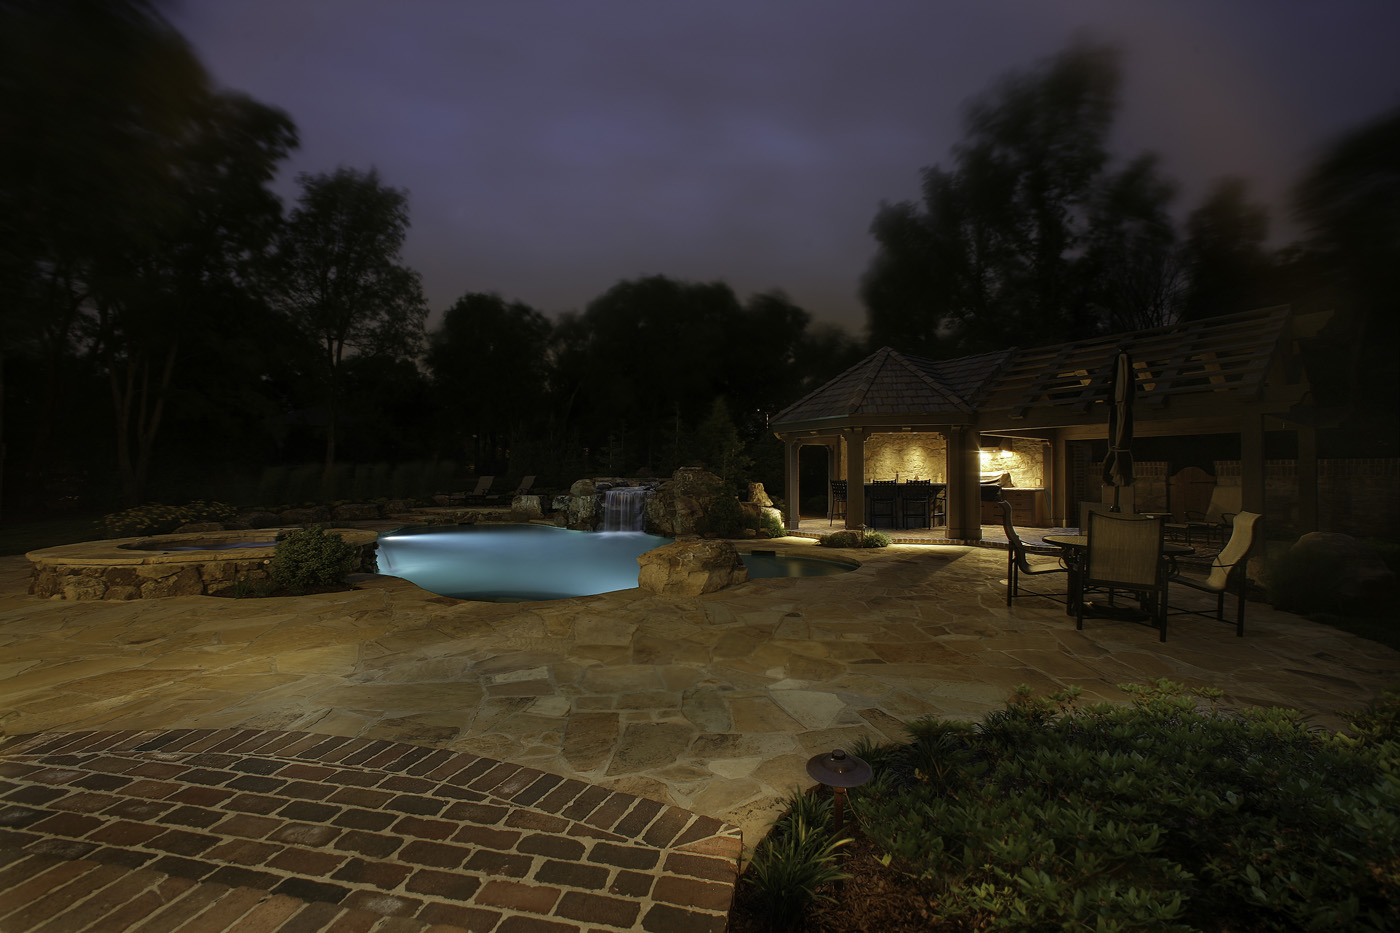 Pool deck and patio with specialty lighting